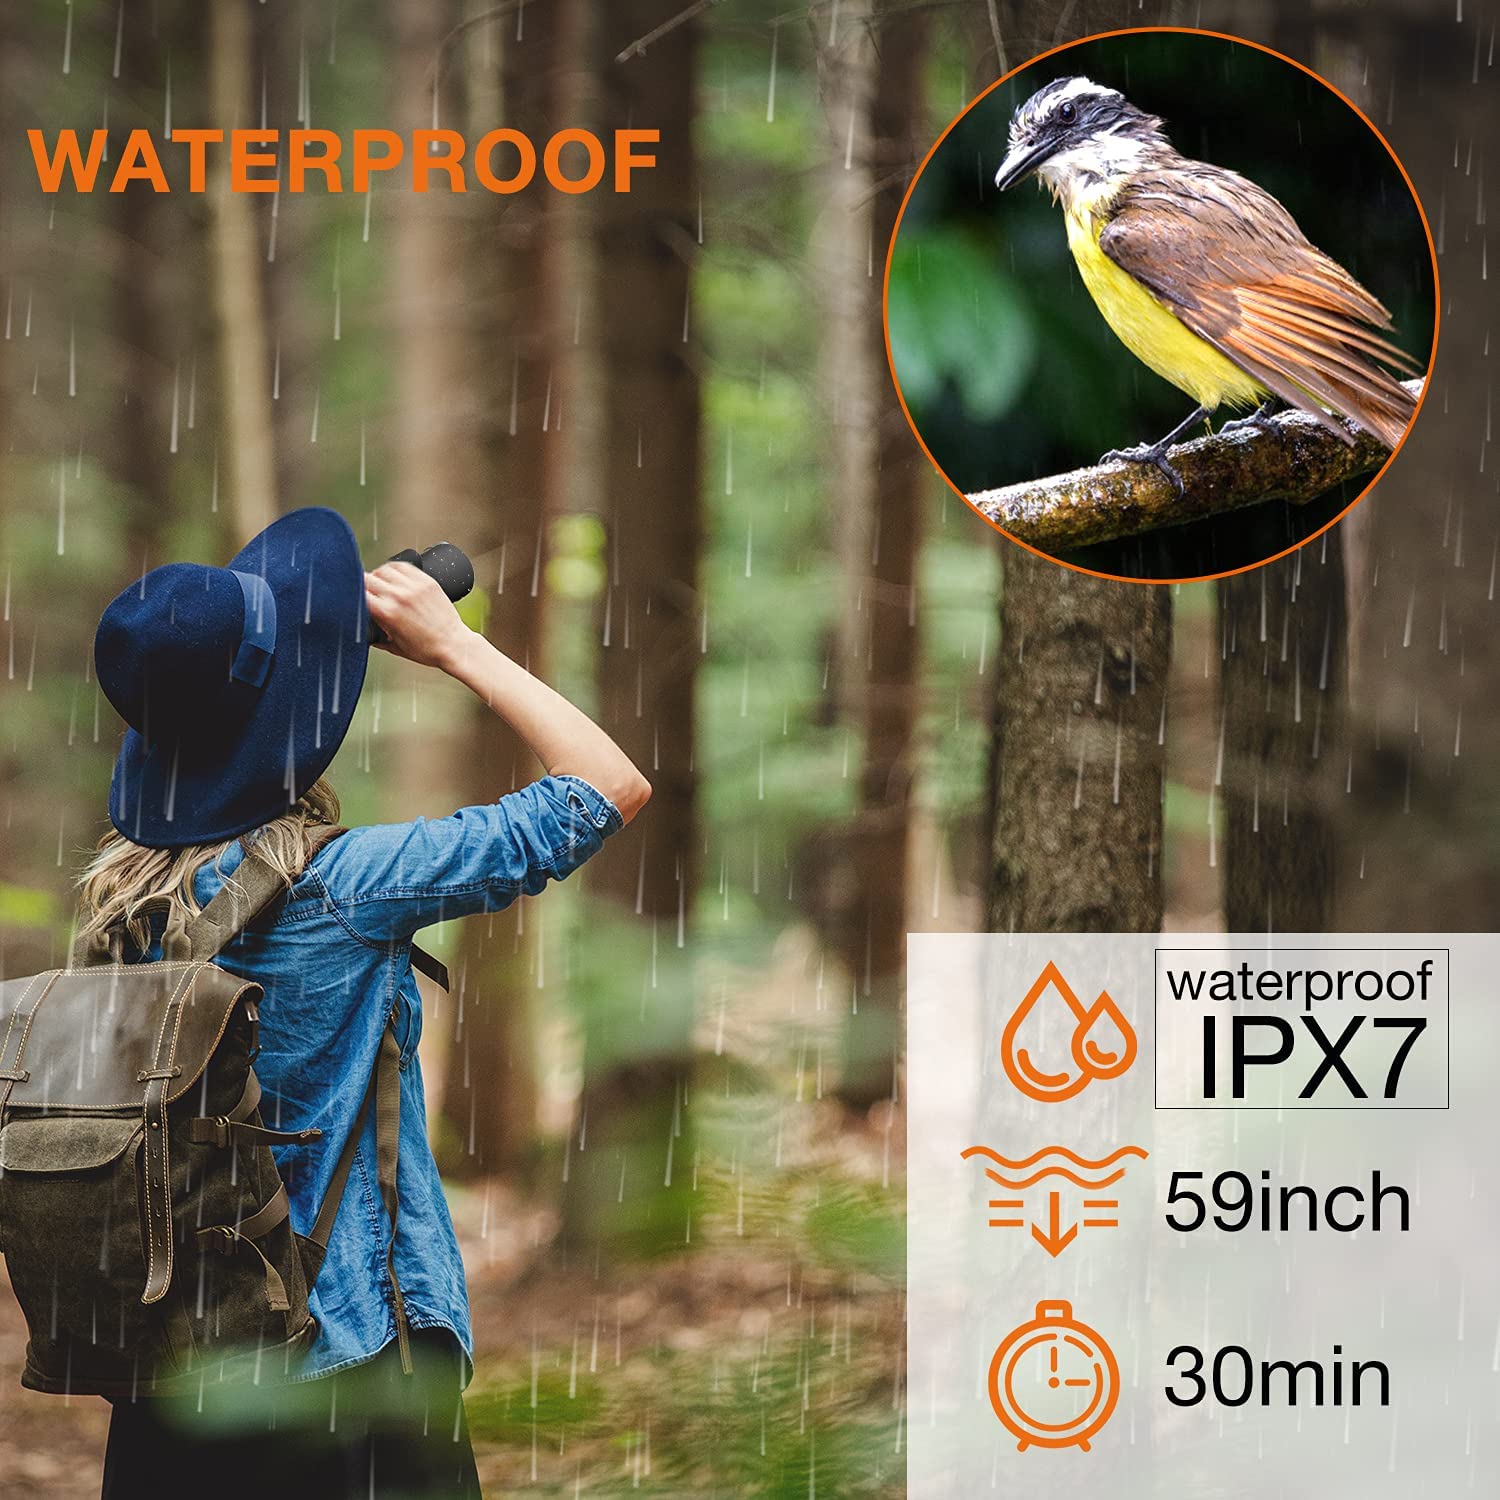 Waterproof HD Monocular Telescope - 12X50 made with Eco-Friendly Materials. - (LNC)